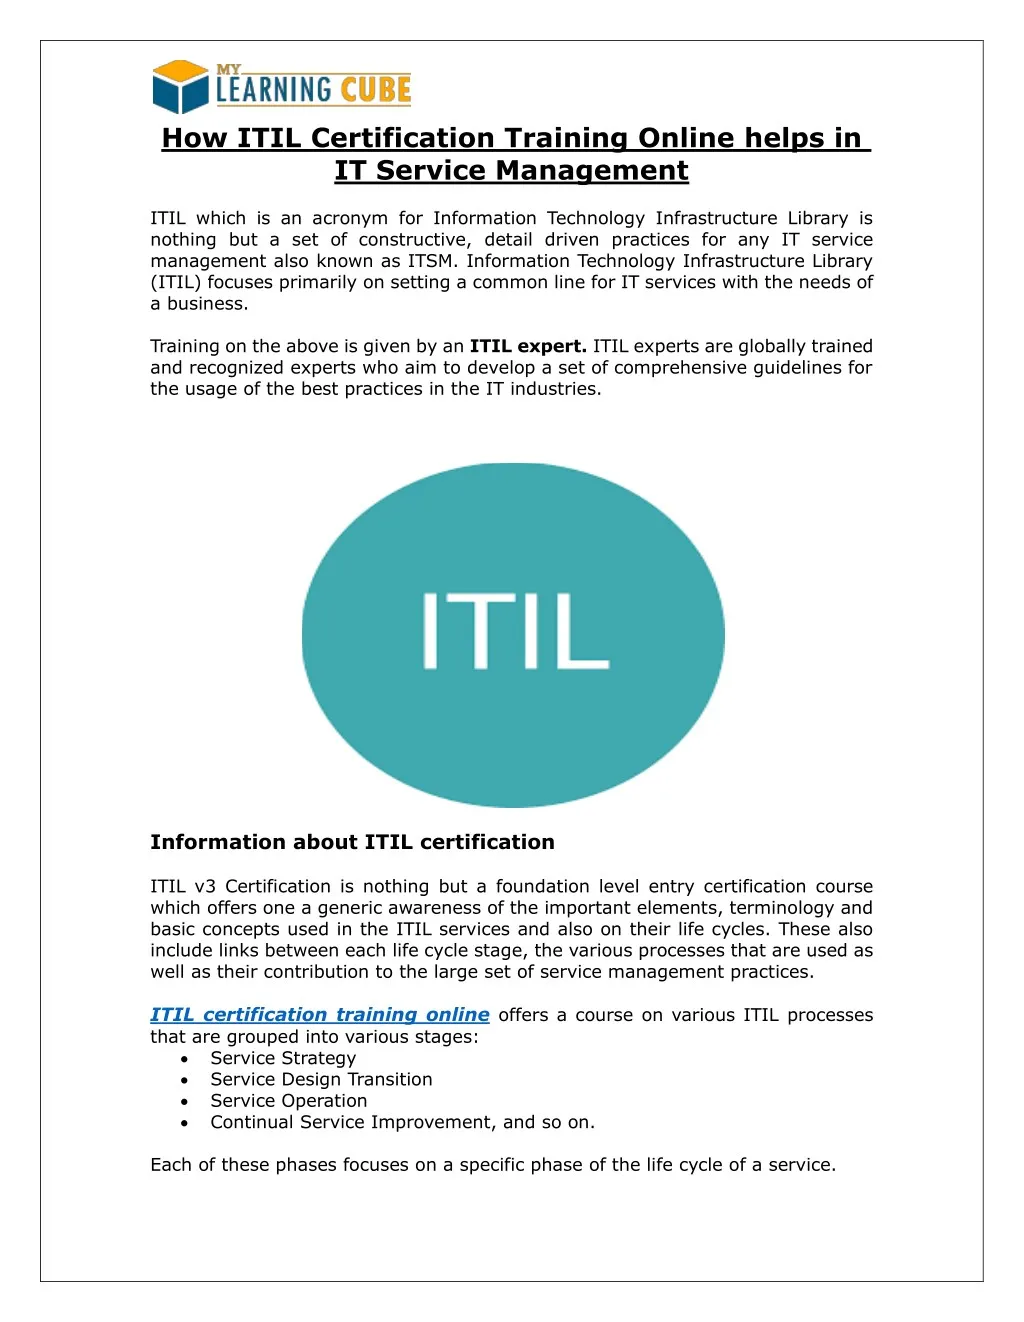 how itil certification training online helps